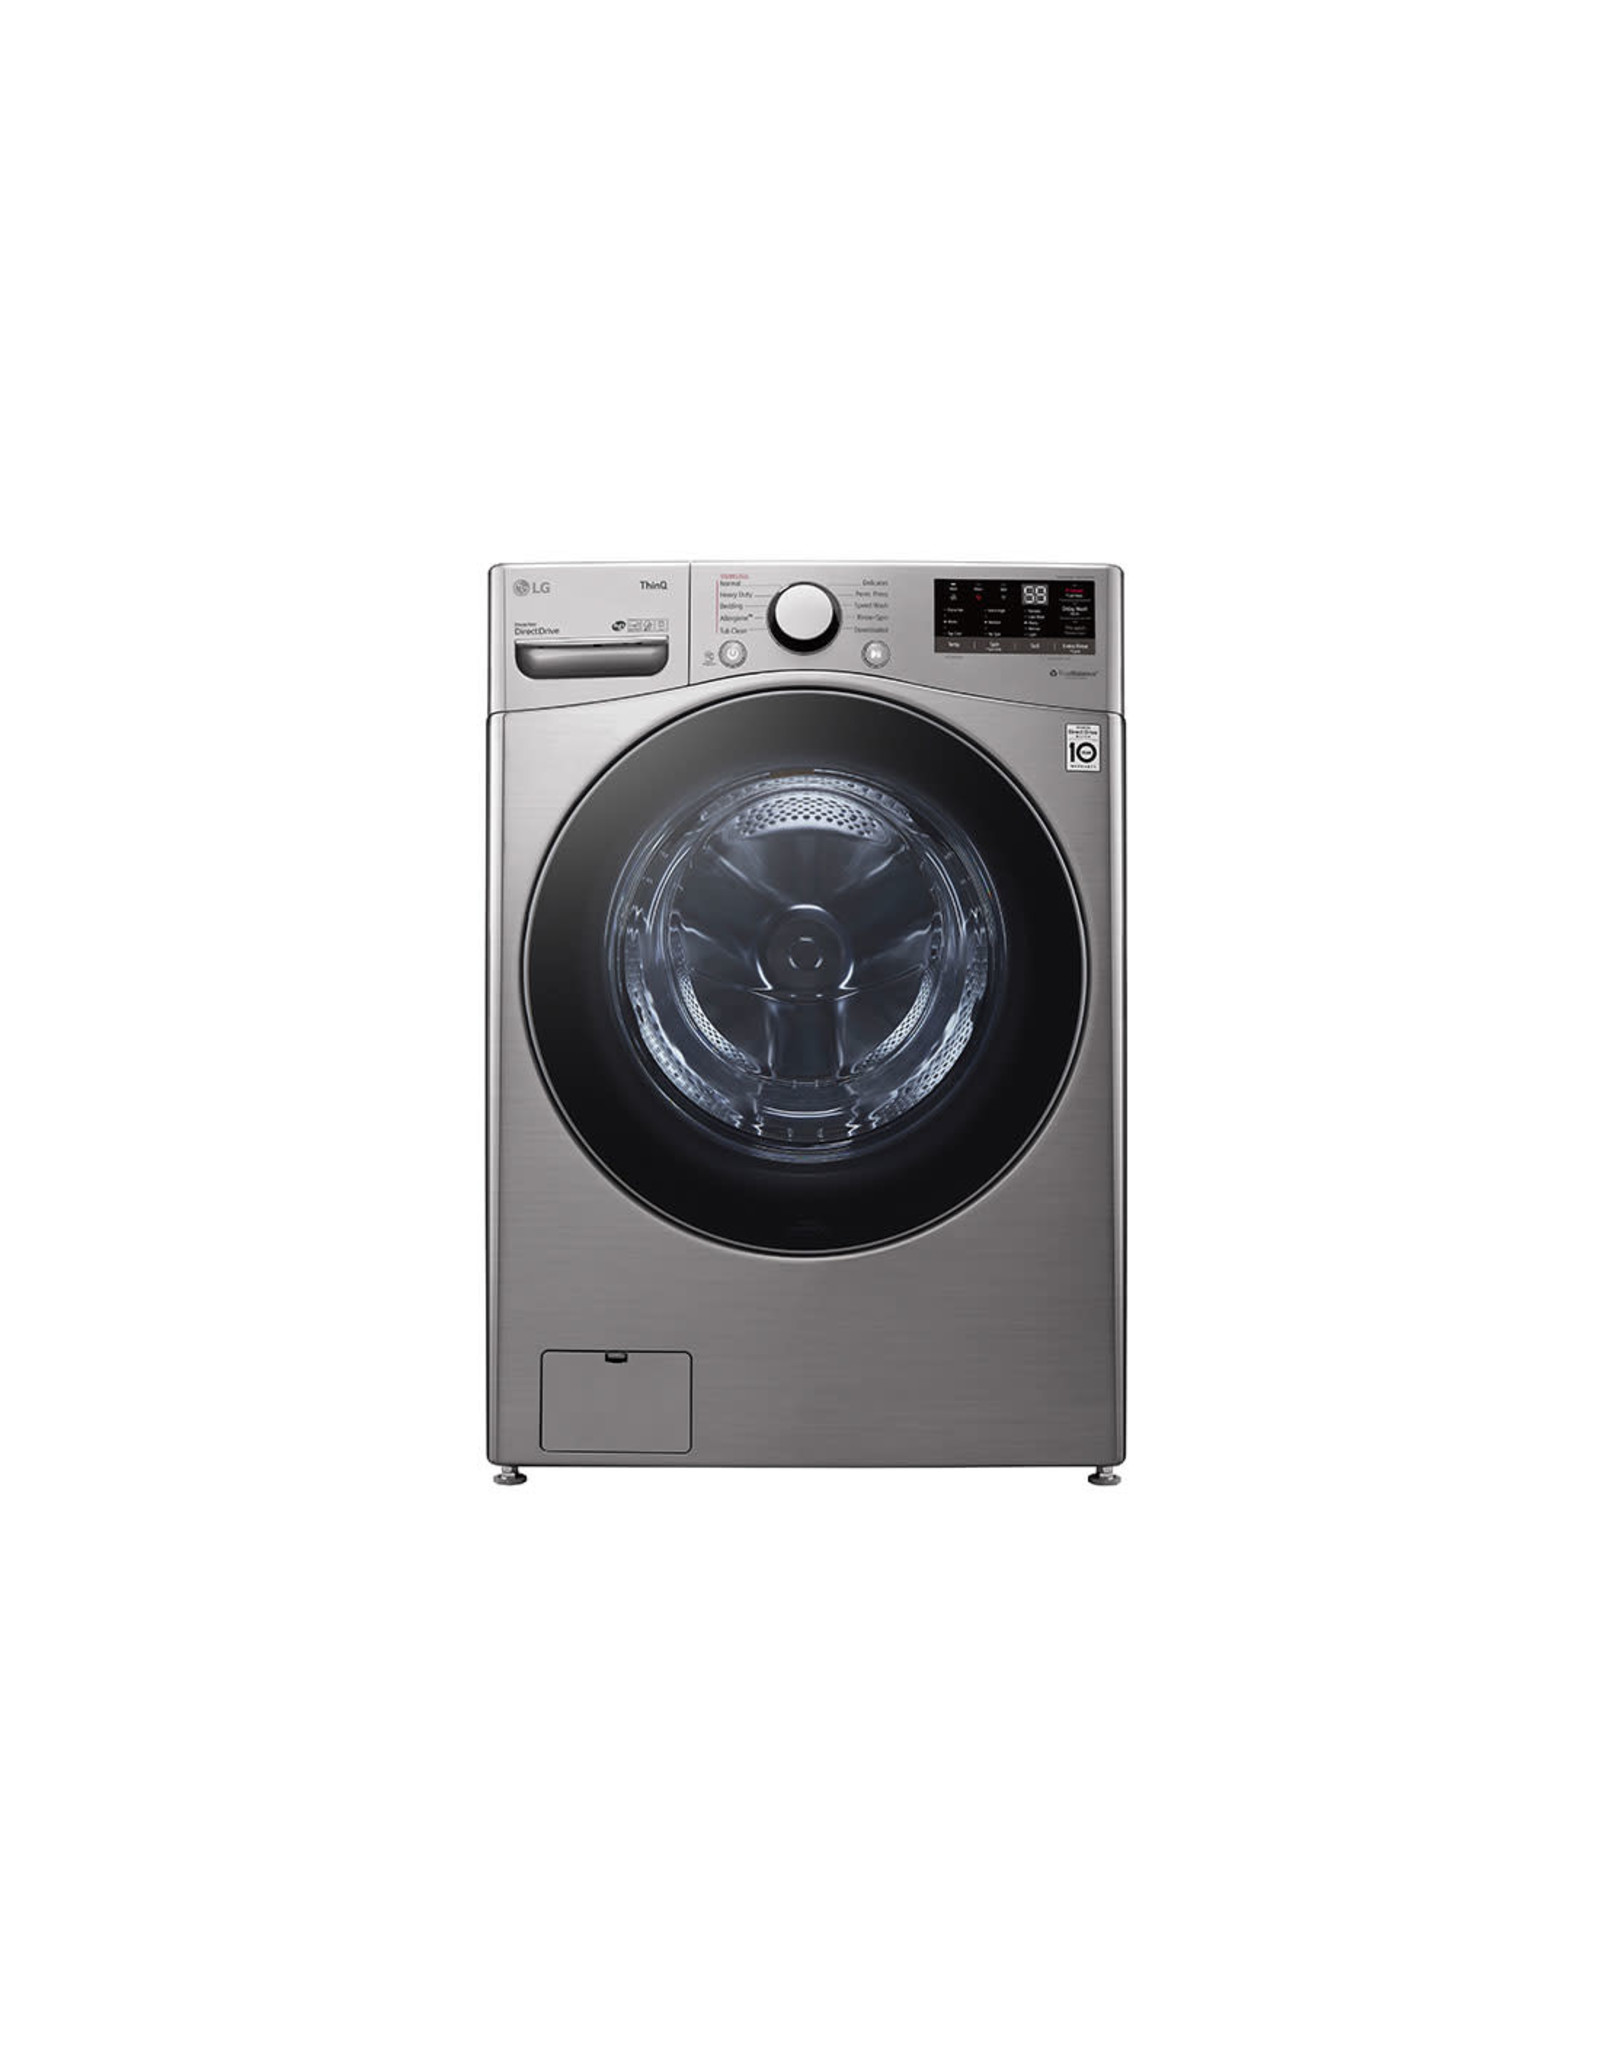 WM3600HVA 27 in. 4.5 cu. ft. Ultra Large Capacity Graphite Steel Front Load Washer with Steam and Wi-Fi Connectivity